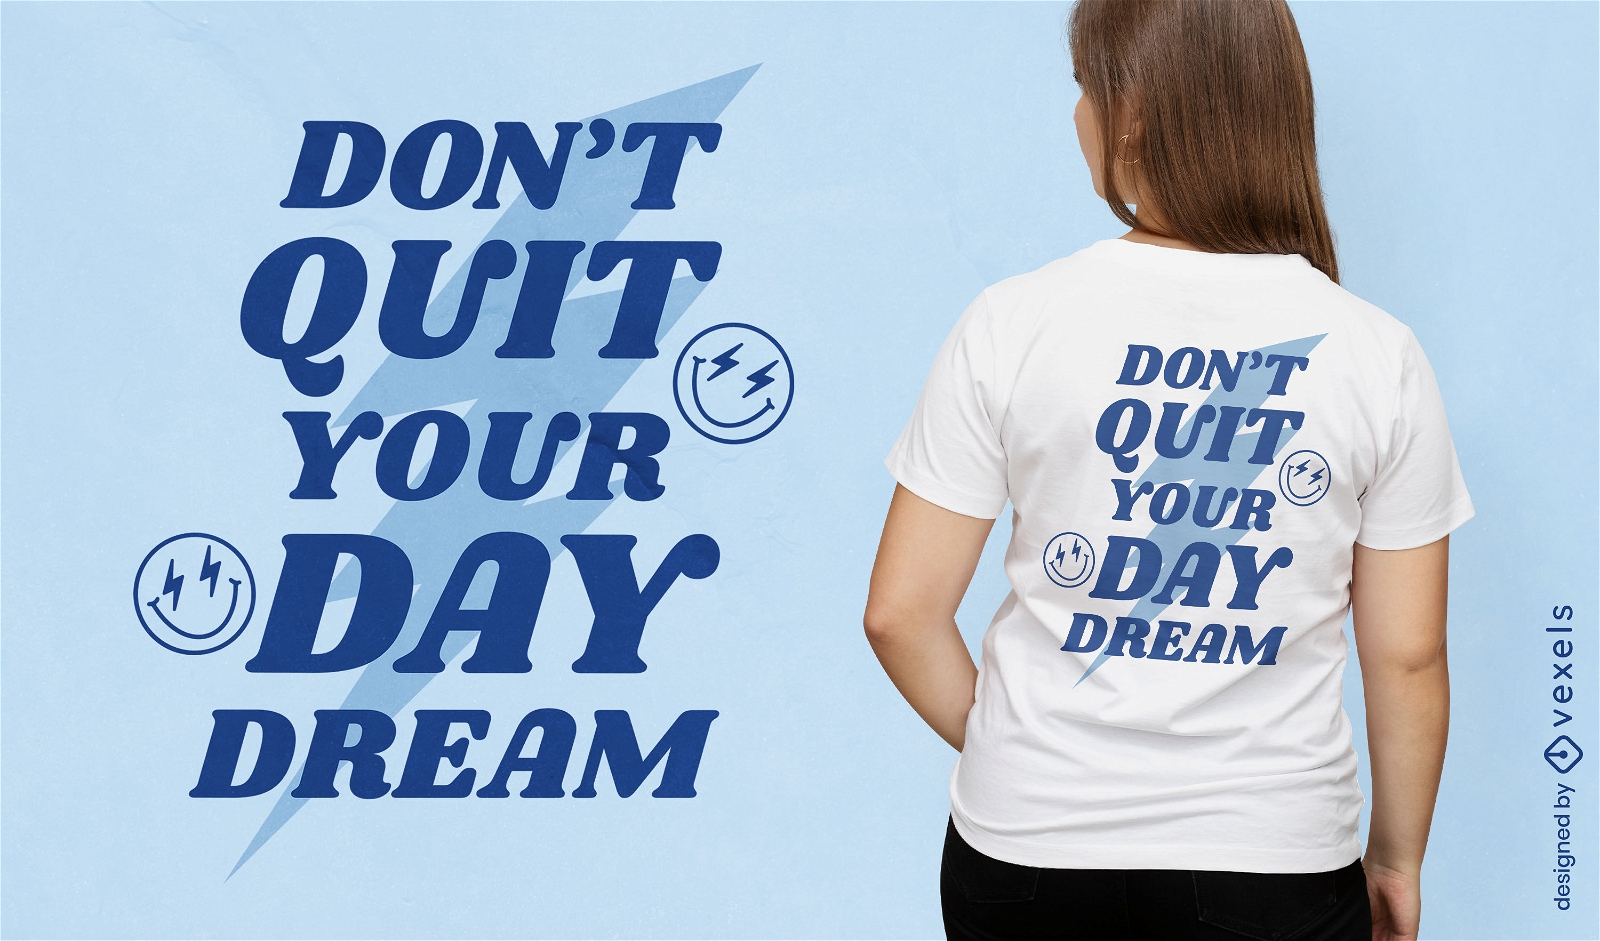 Don't quit your day dream quote t-shirt design